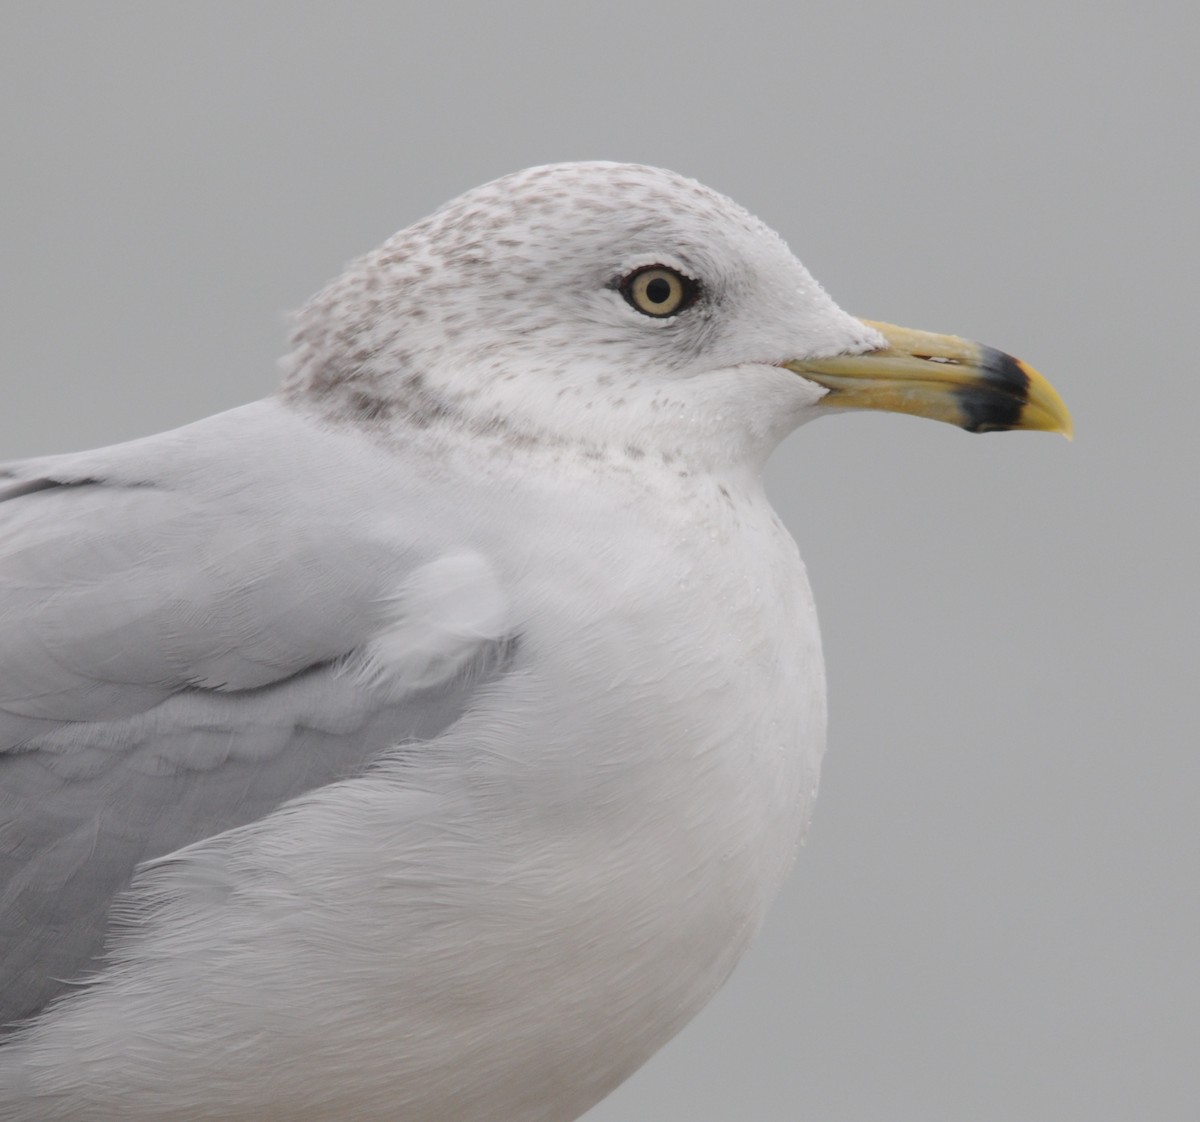 Ring-billed Gull - Max  Chalfin-Jacobs